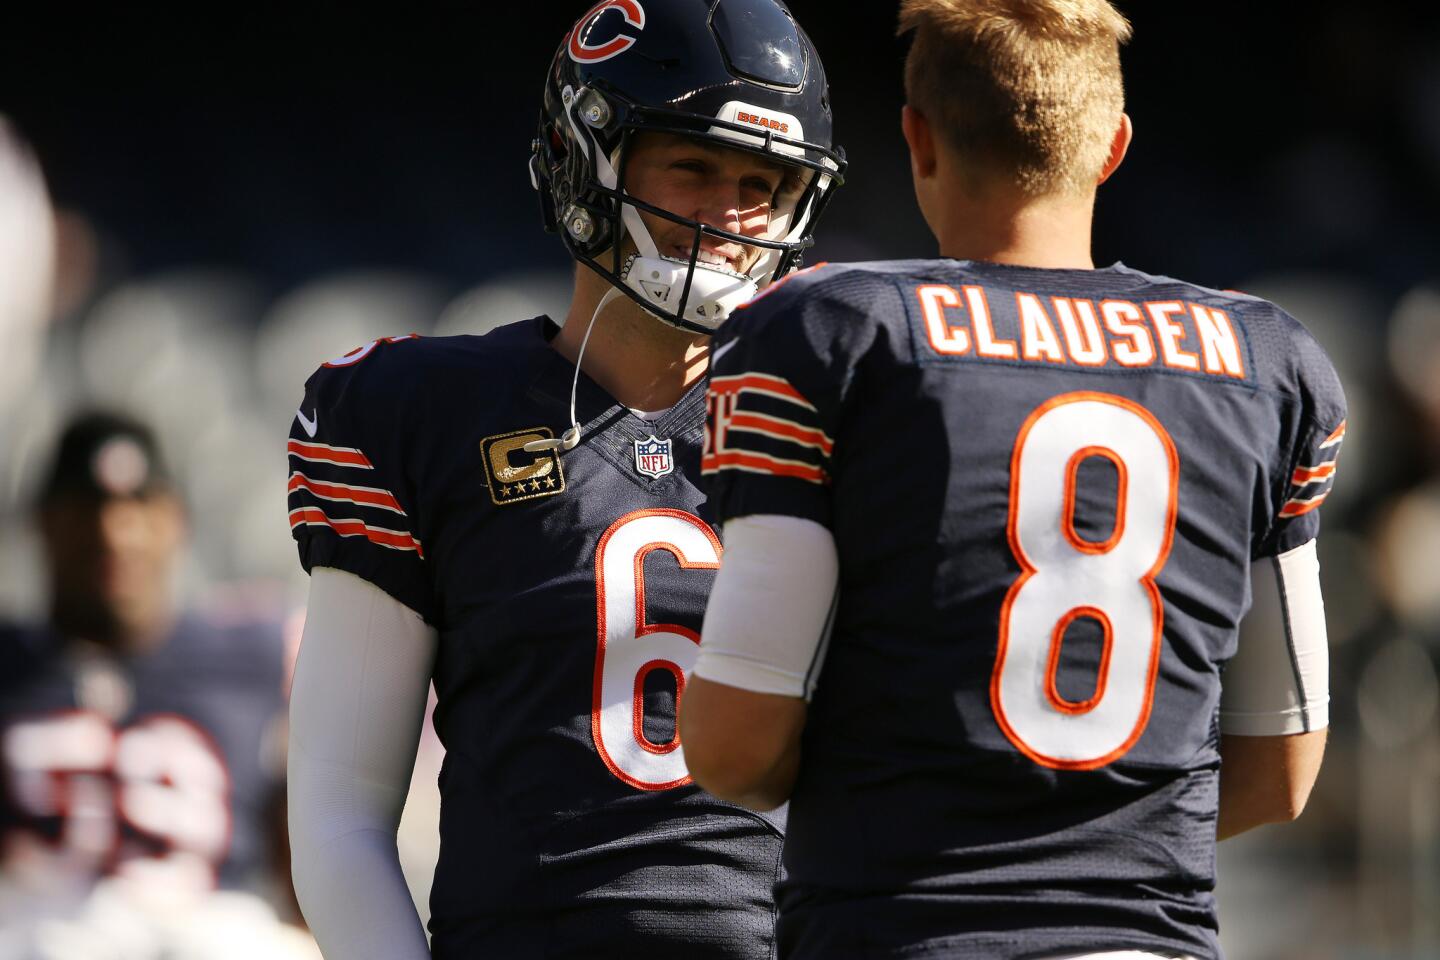 Jay Cutler talks with quarterback Jimmy Clausen before the game against the Vikings.